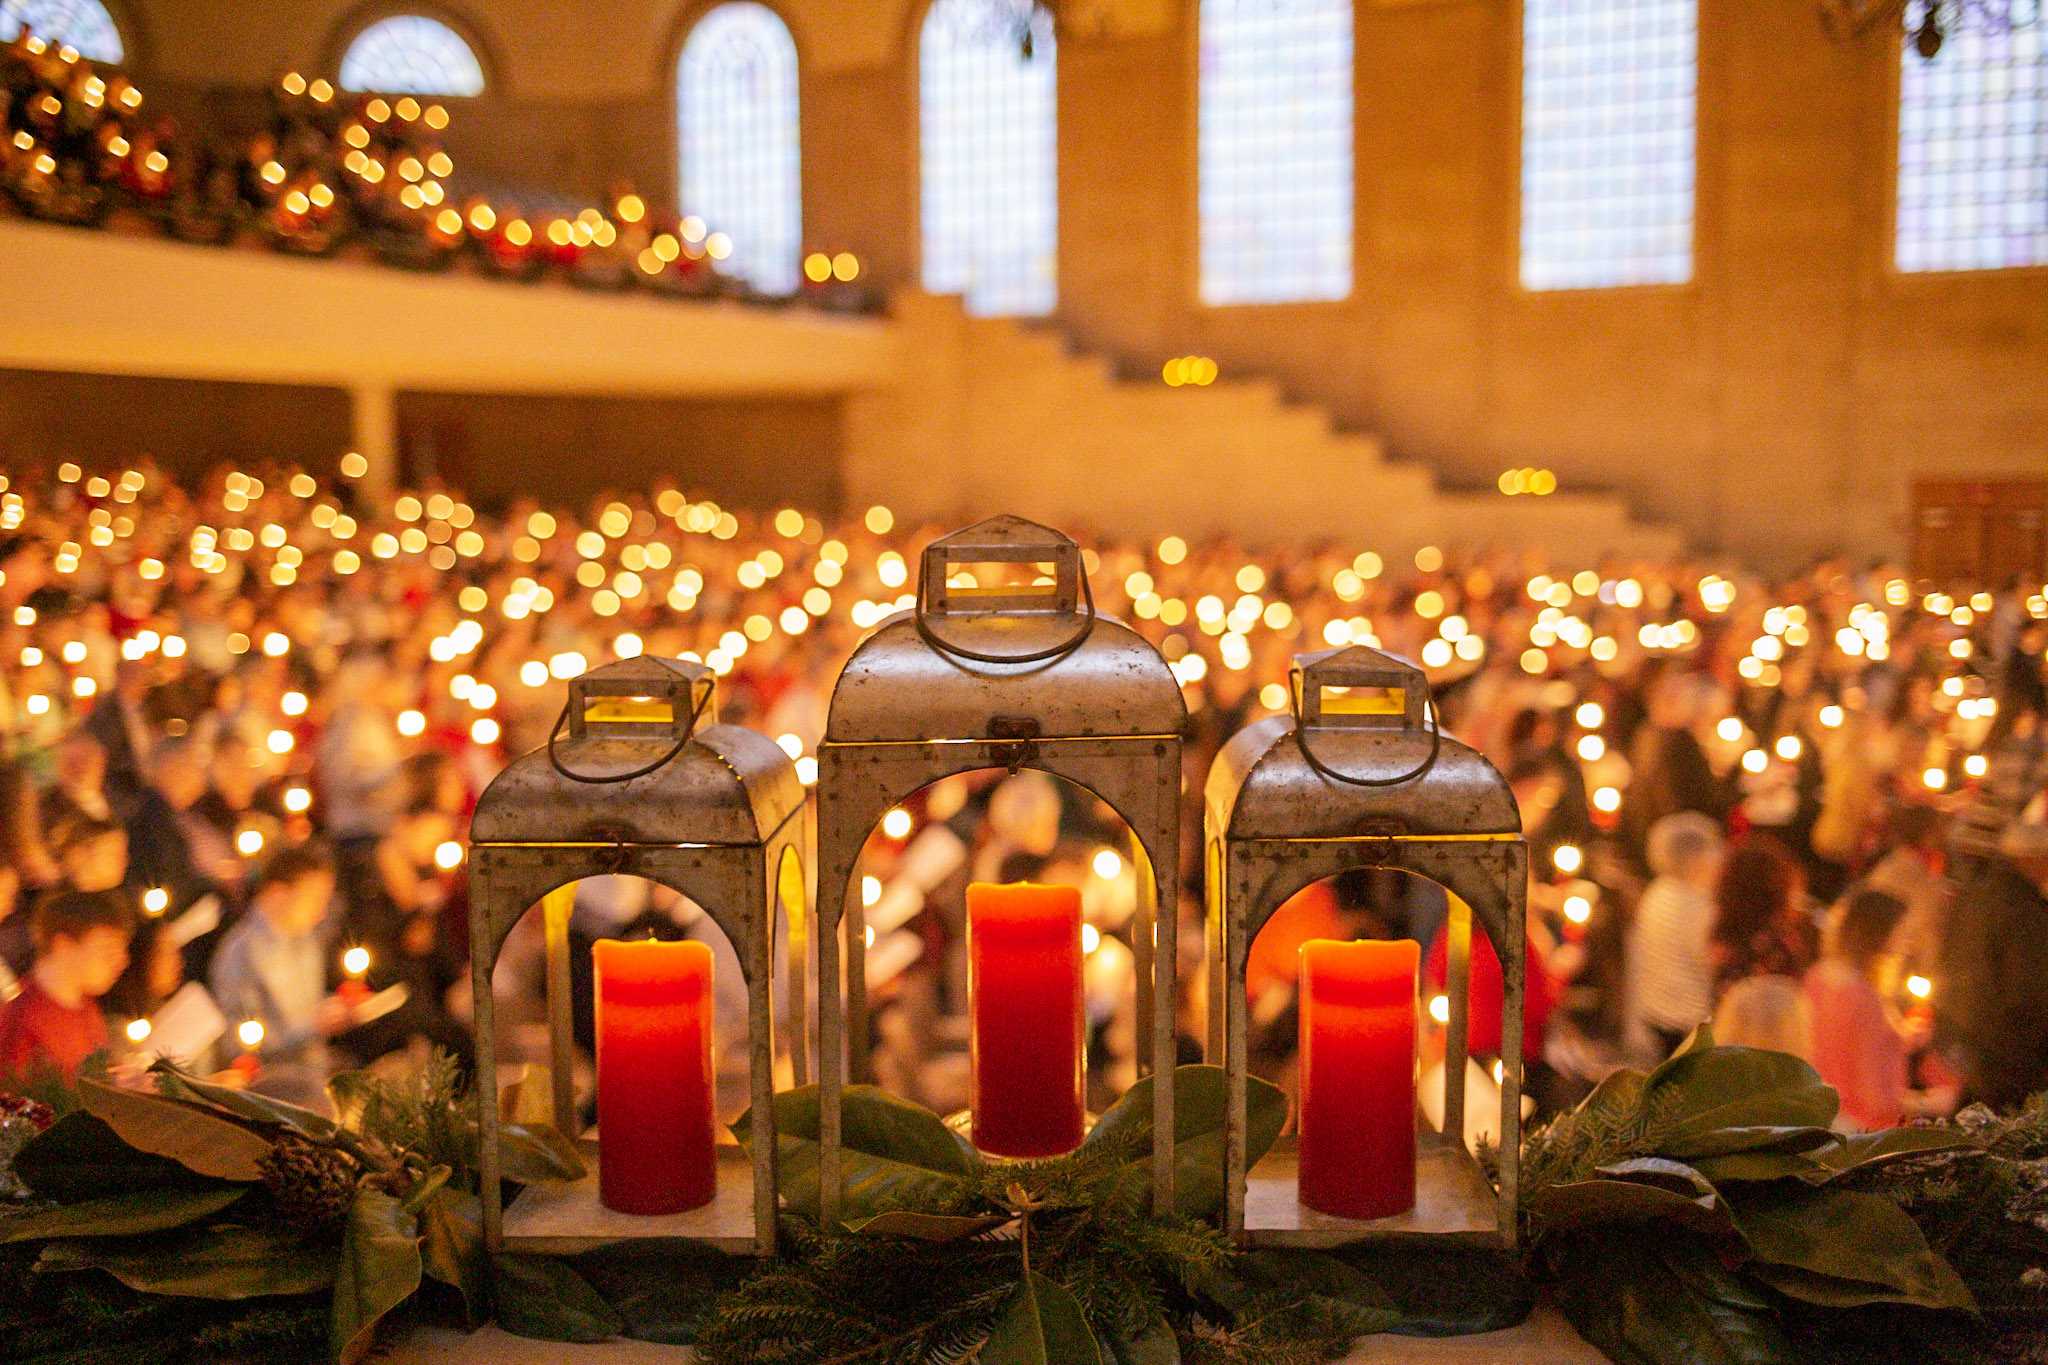 The service featured a candle lighting ceremony that united the crowd under the theme of Lovefeast. The event first began in December 1965 and has become a tradition since.